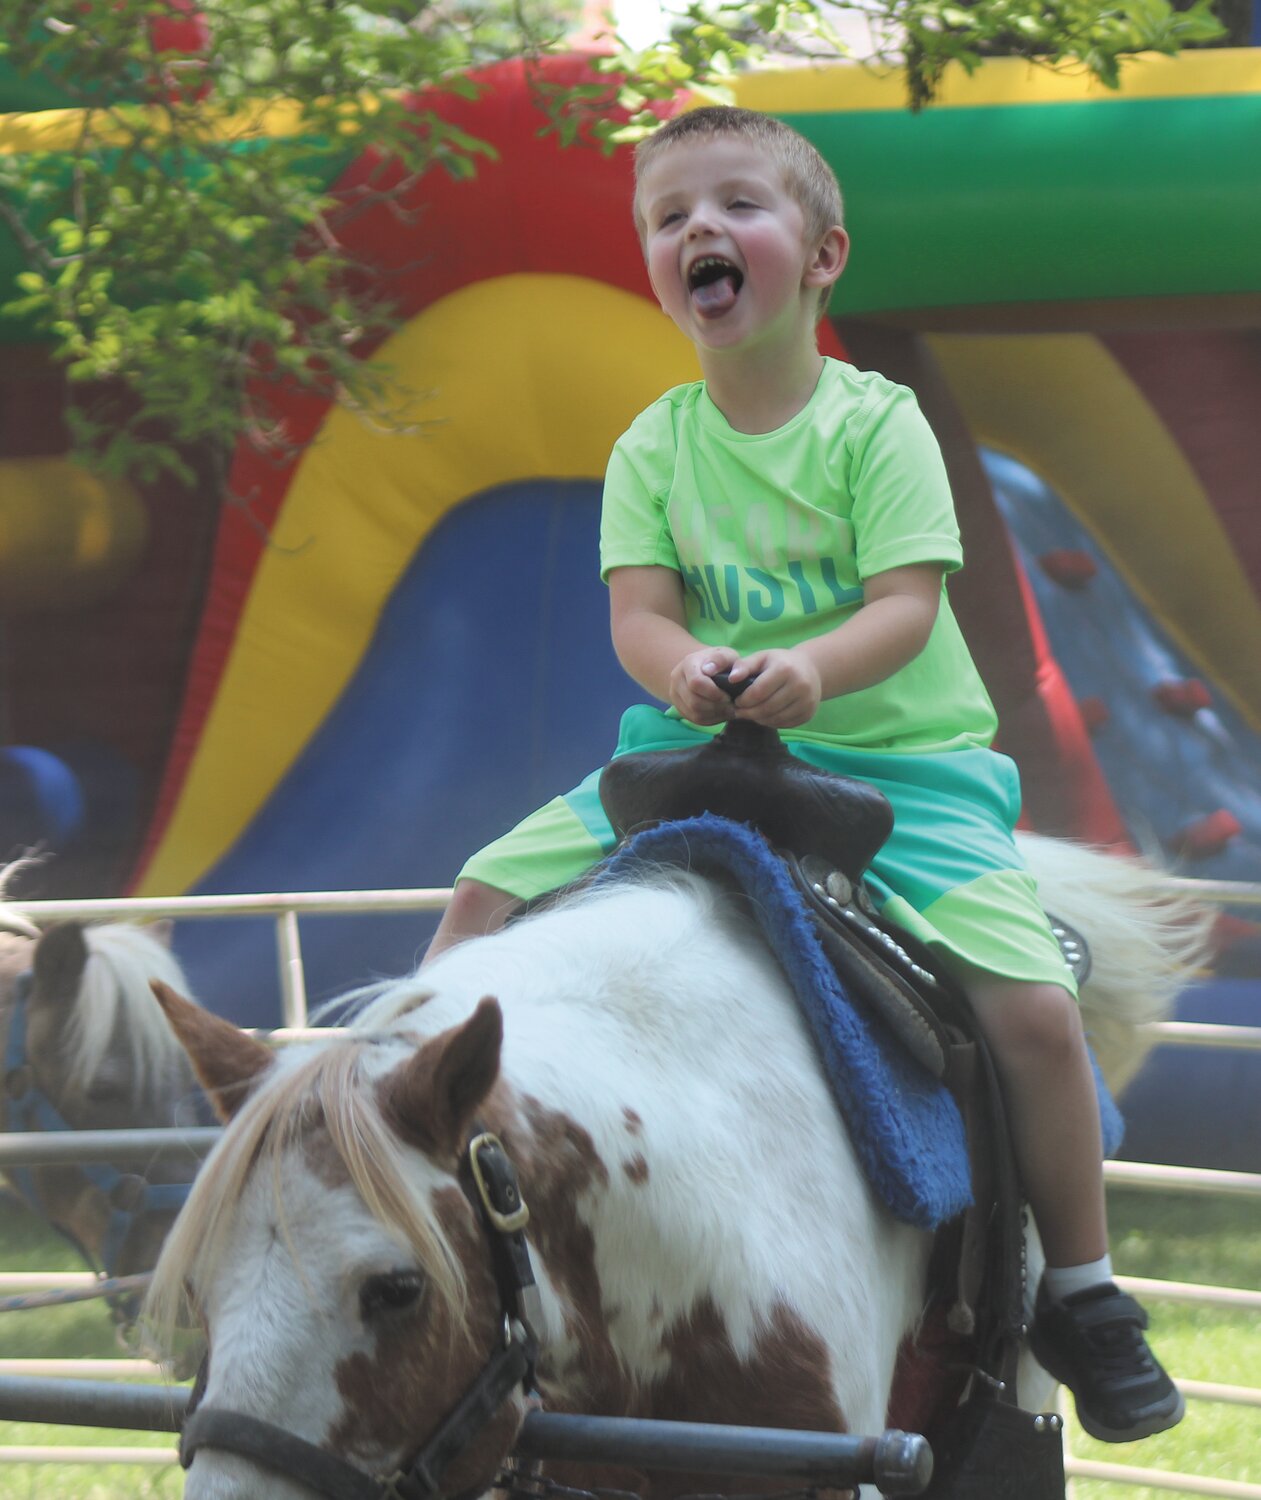 Kaine Jones, 4, couldn't hold back his happiness while riding a pony in the Children's Area.